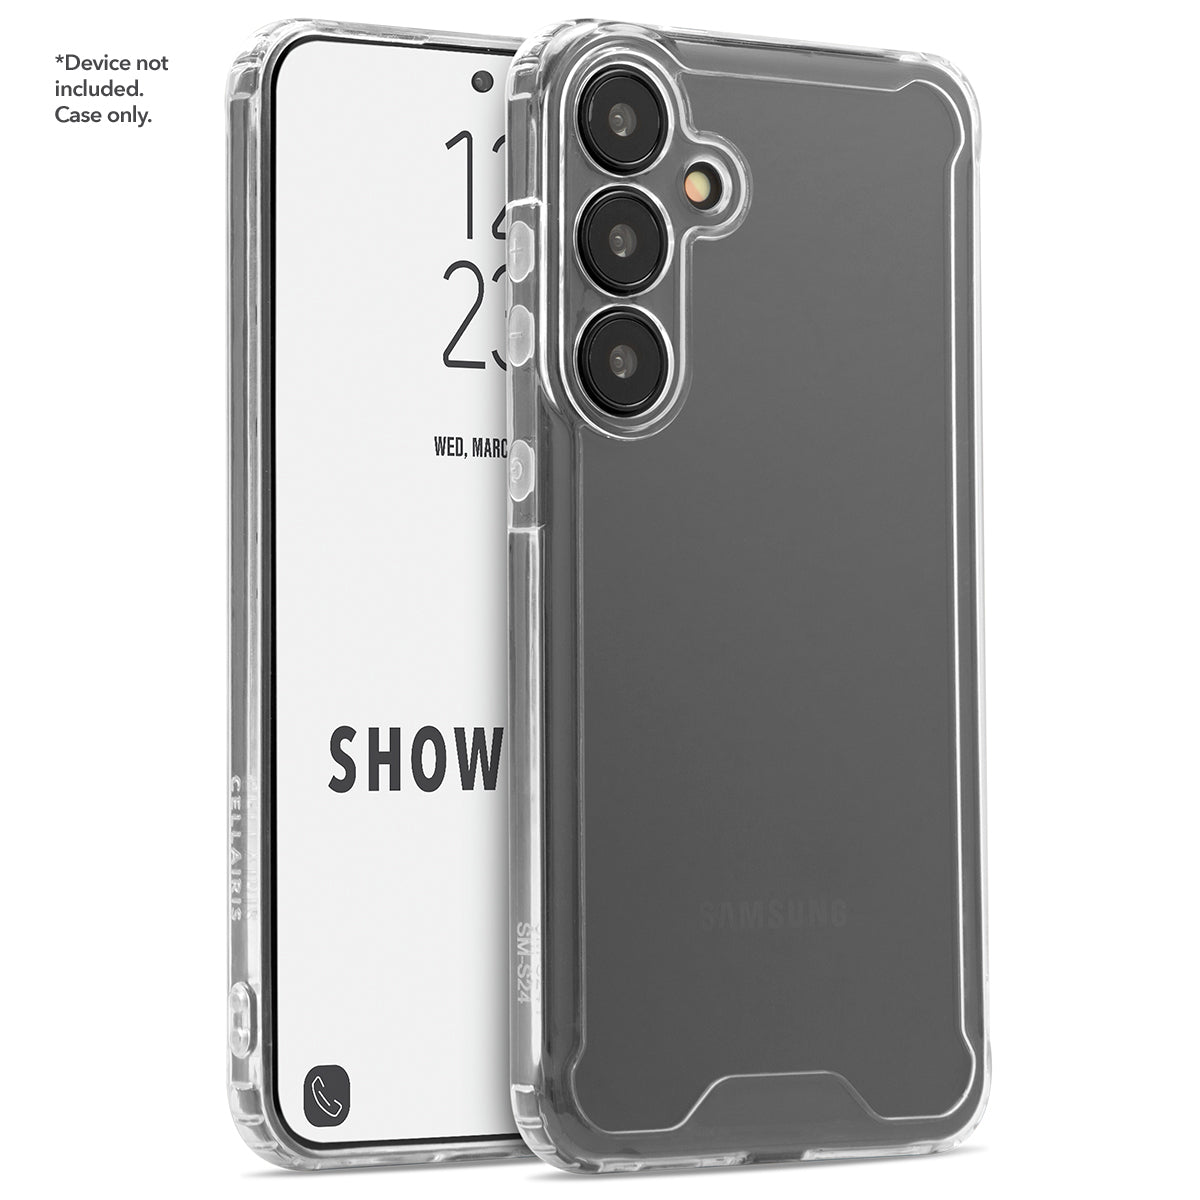 Showcase - SS S24 Clear Cases